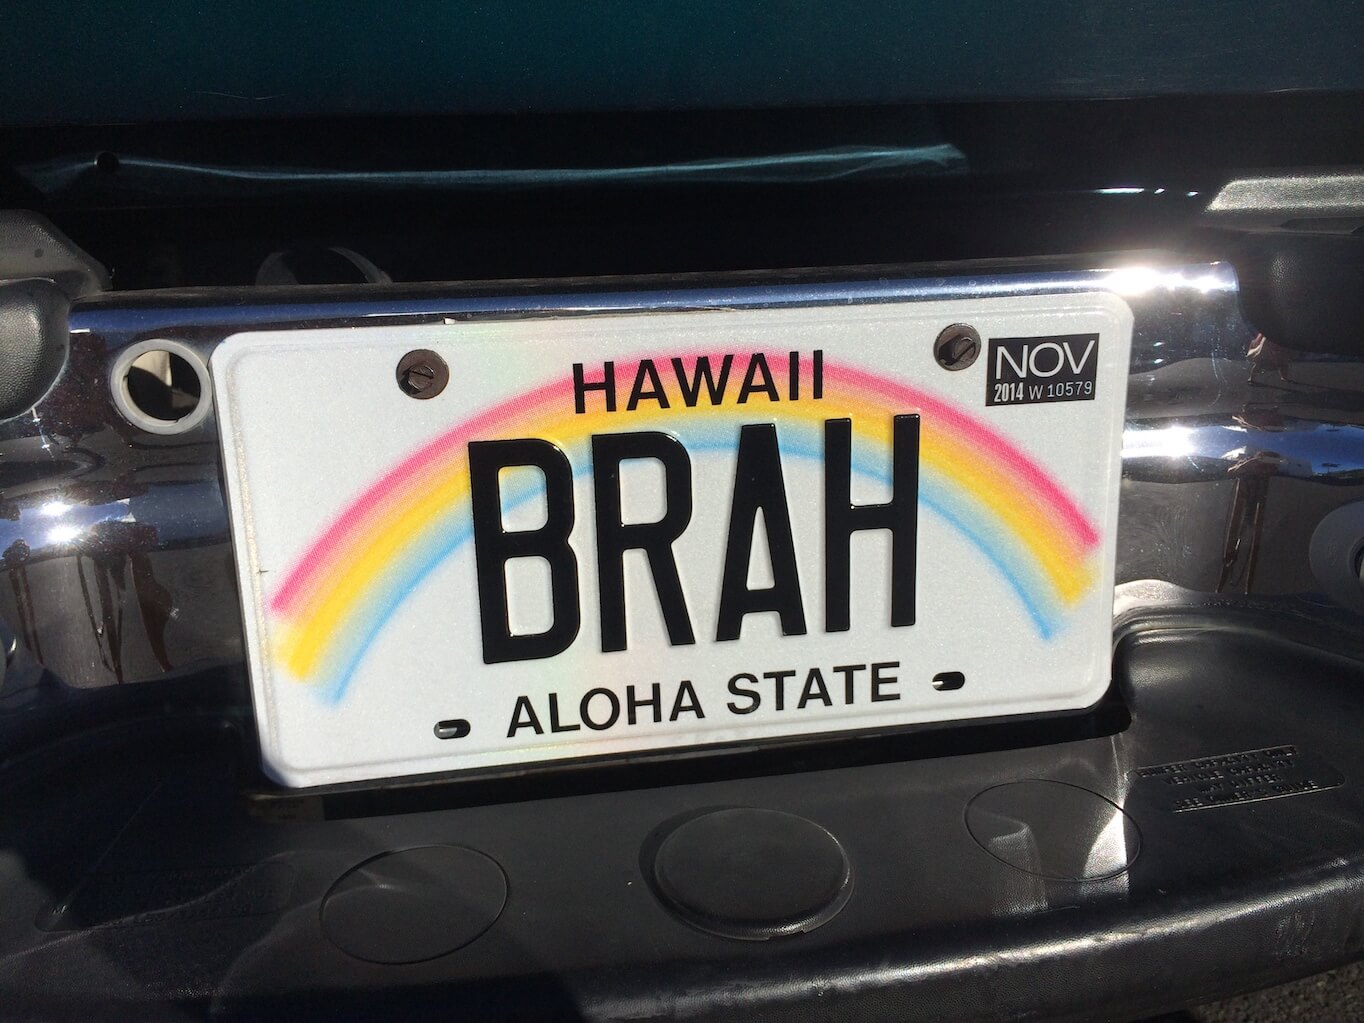 A Hawaii license plate. You won't find any commercial Hawaii billboards when driving on the islands.